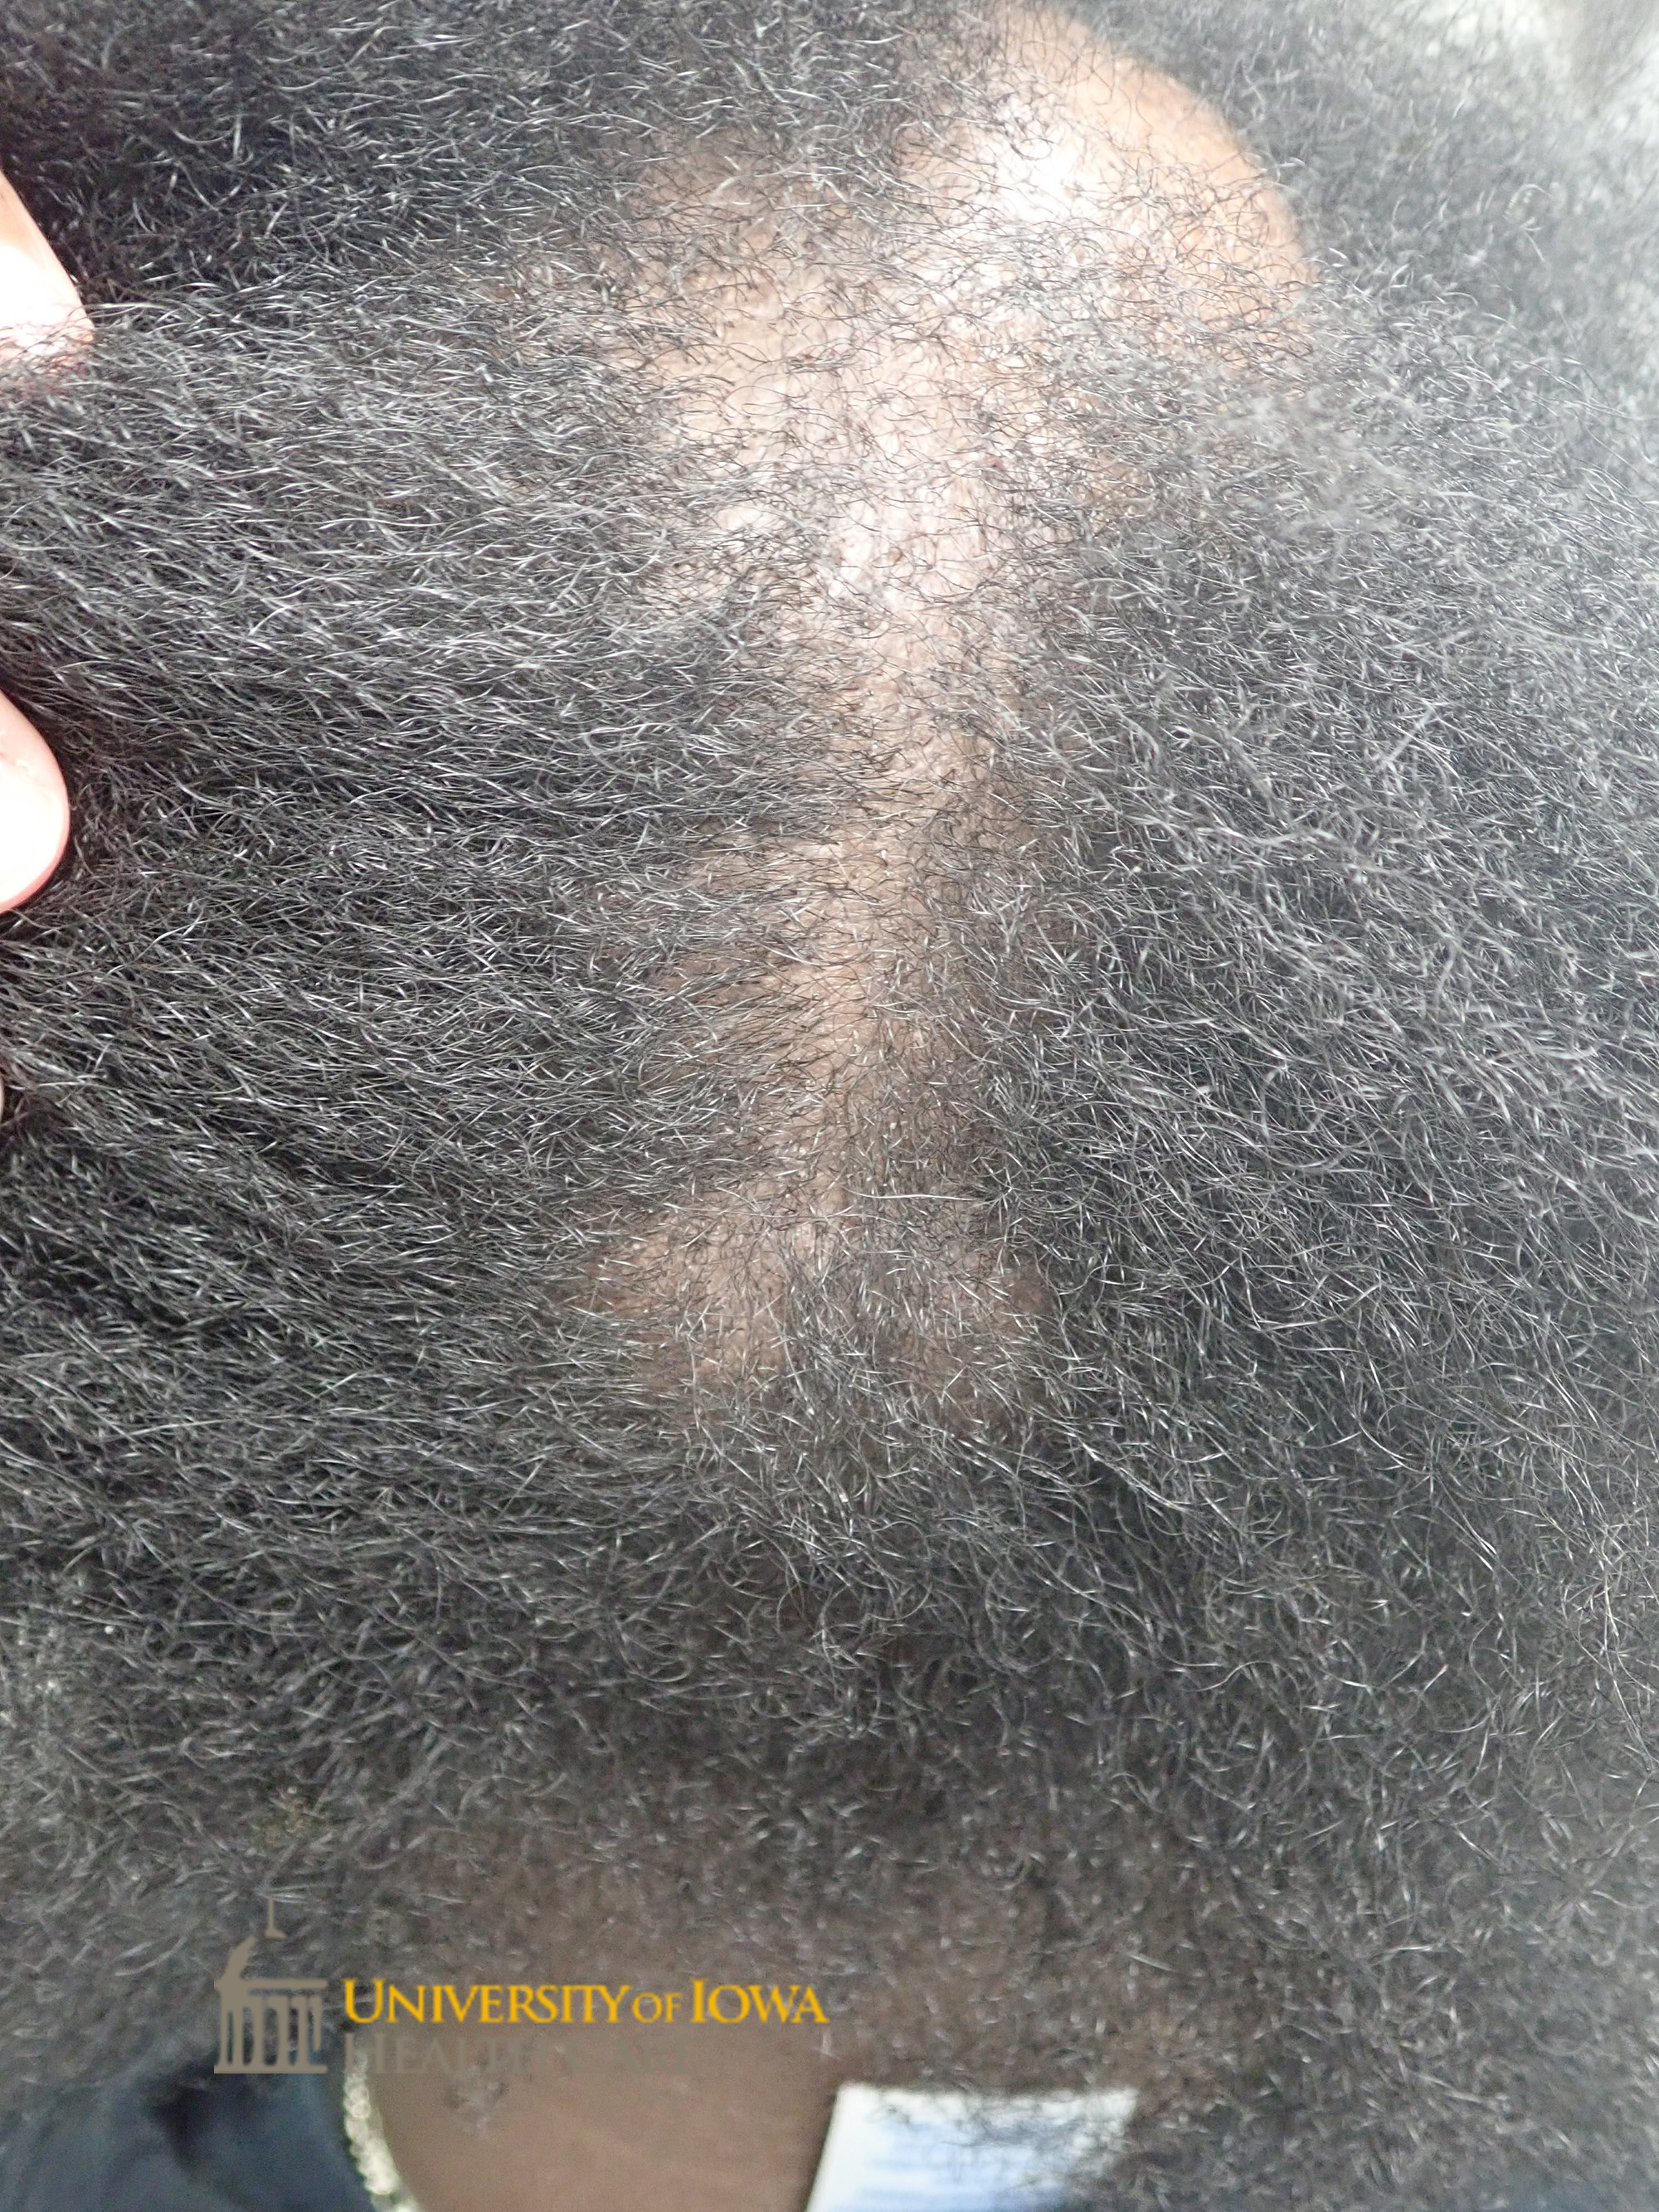 A large patch of scarring alopecia with irregular borders and with some retained hair follicles on the anterior and vertex scalp. (click images for higher resolution).